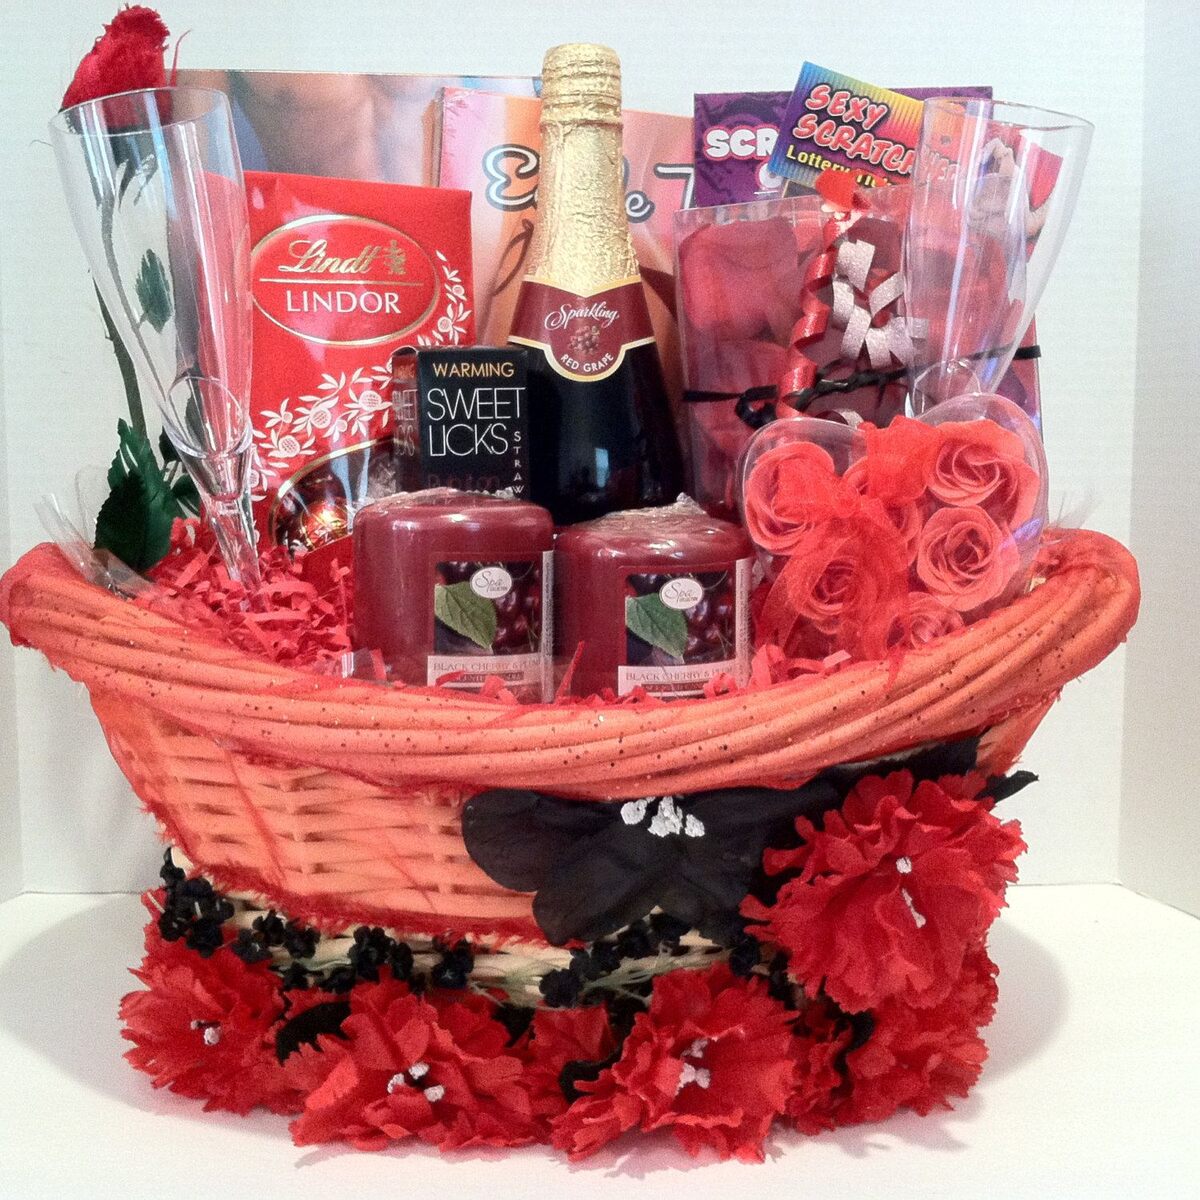 How To Make A Valentine's Gift Basket